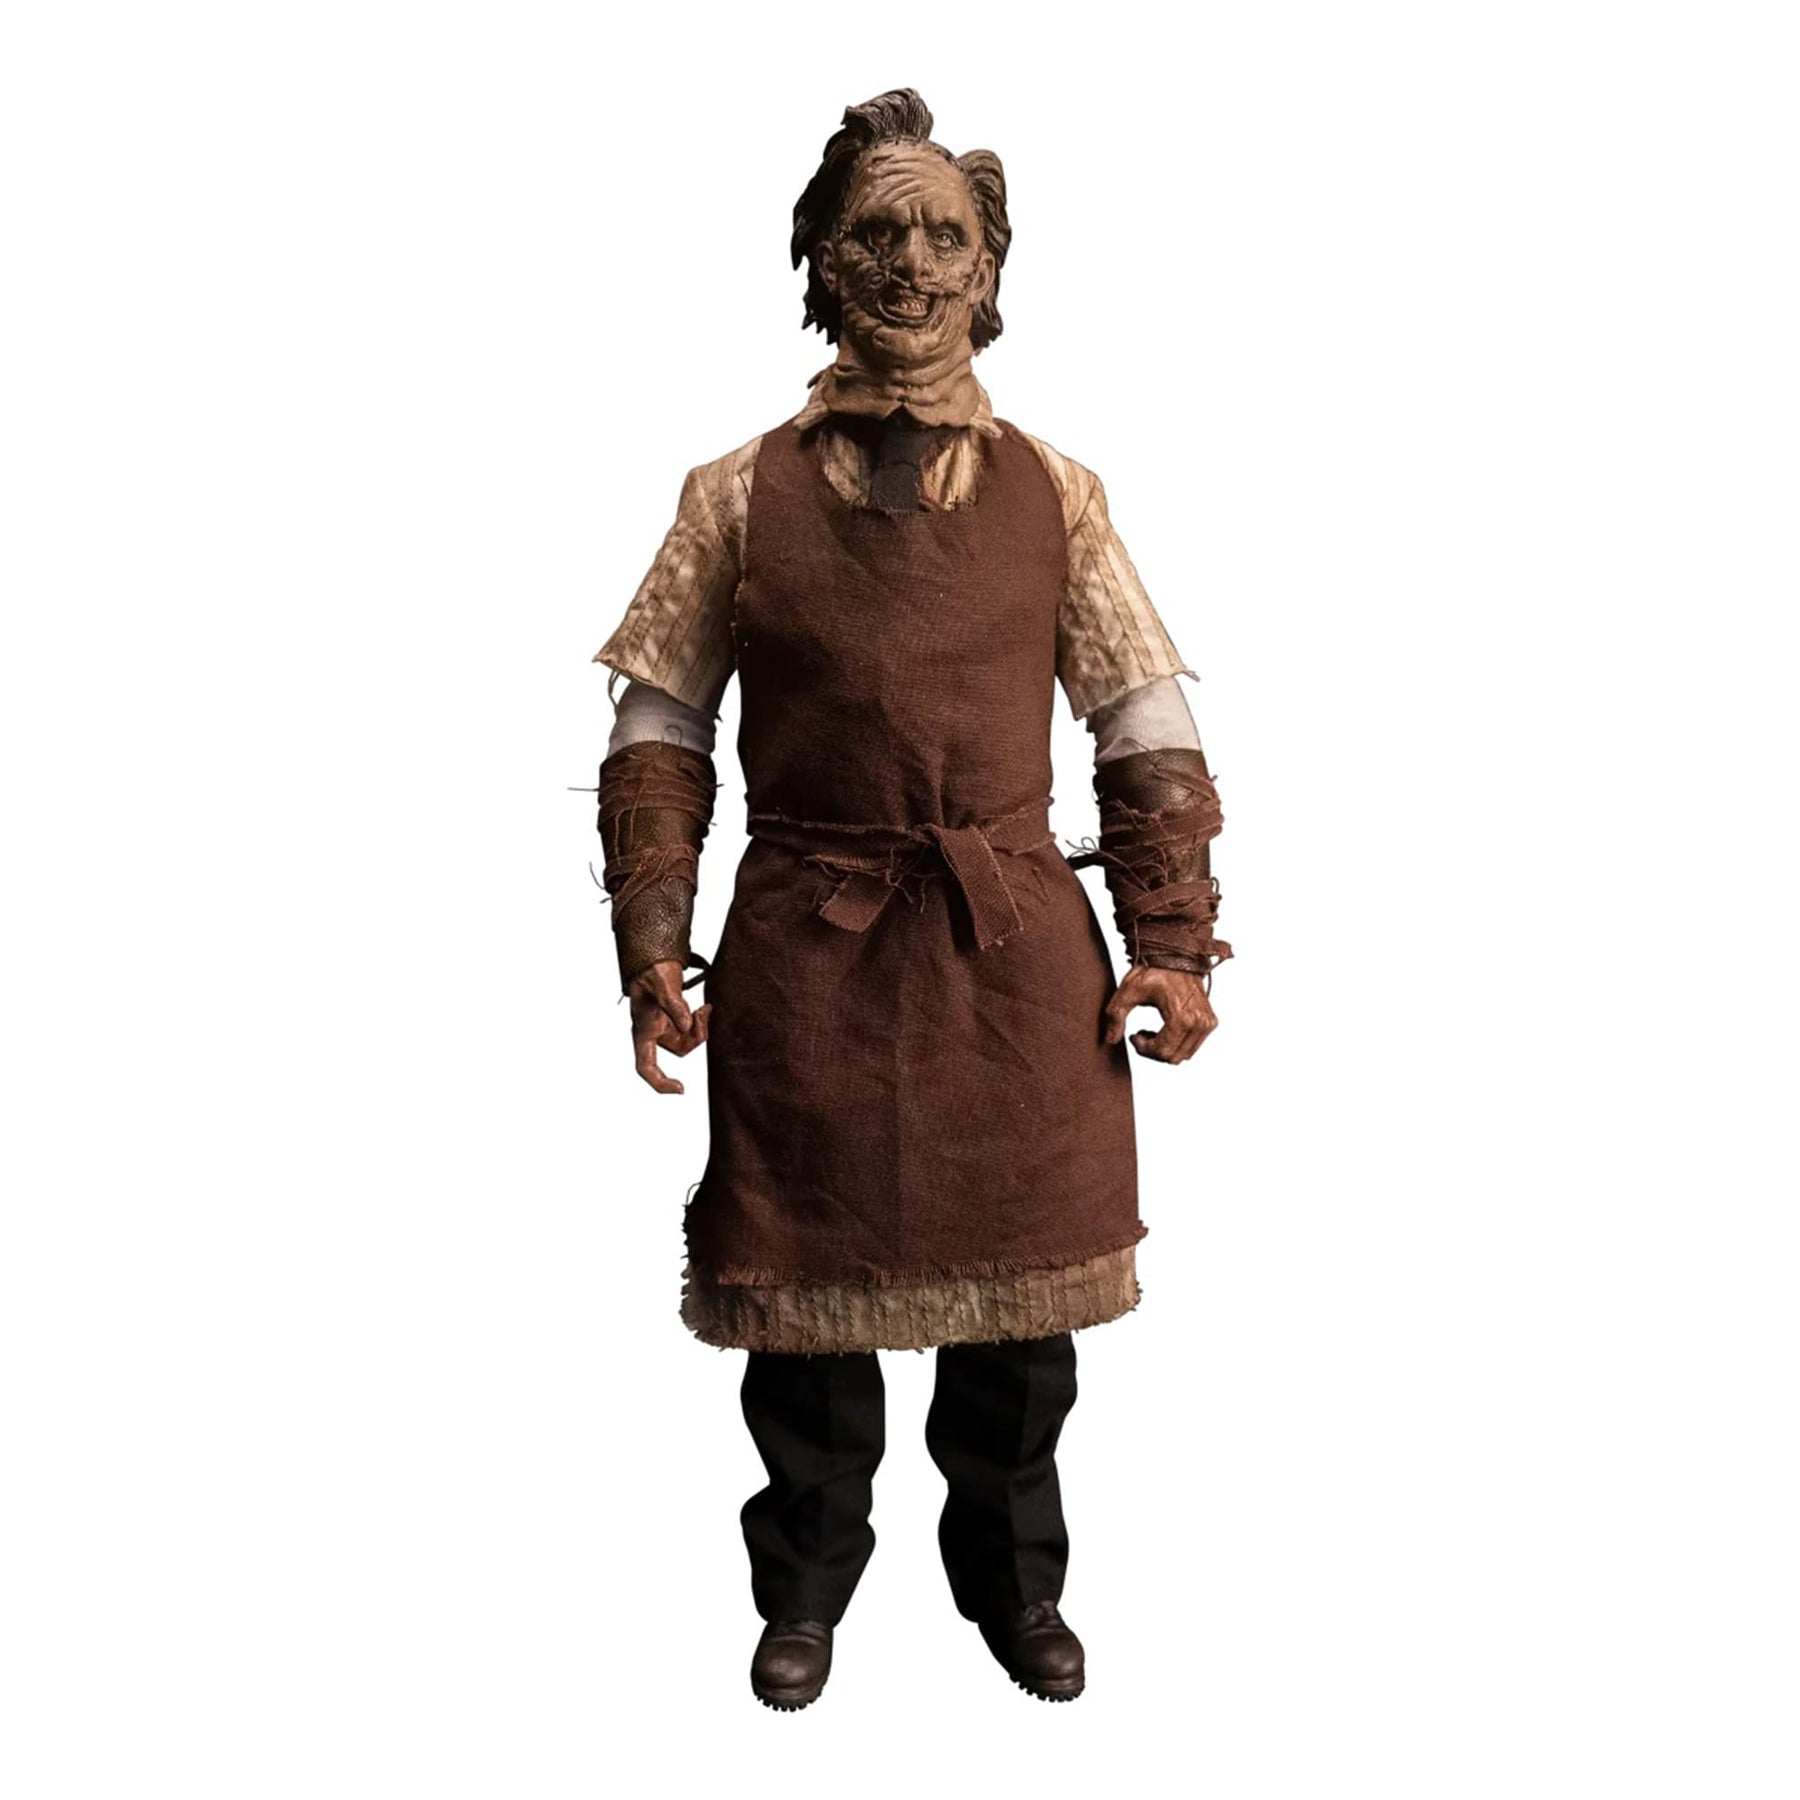 Texas Chainsaw Massacre 2003 Leatherface 1:6 Scale Action Figure